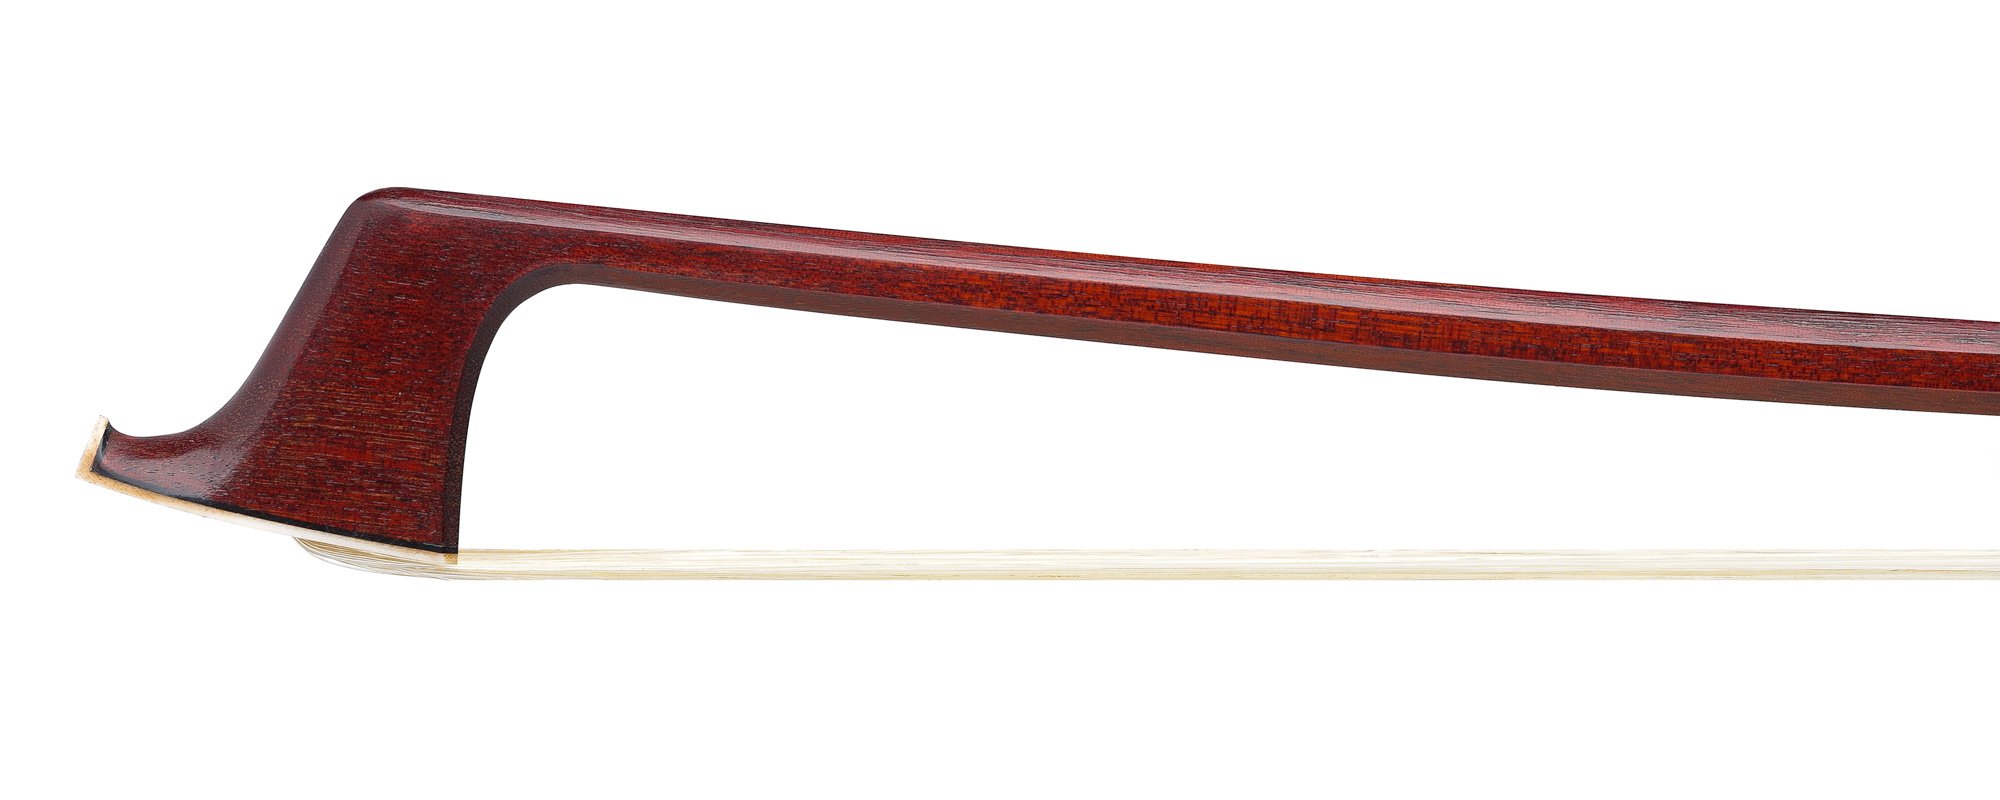 DAVID RUSSELL YOUNG cello bow, octagonal Pernambuco stick with silver mounted ebony frog, 80.9 grams, Colorado, USA